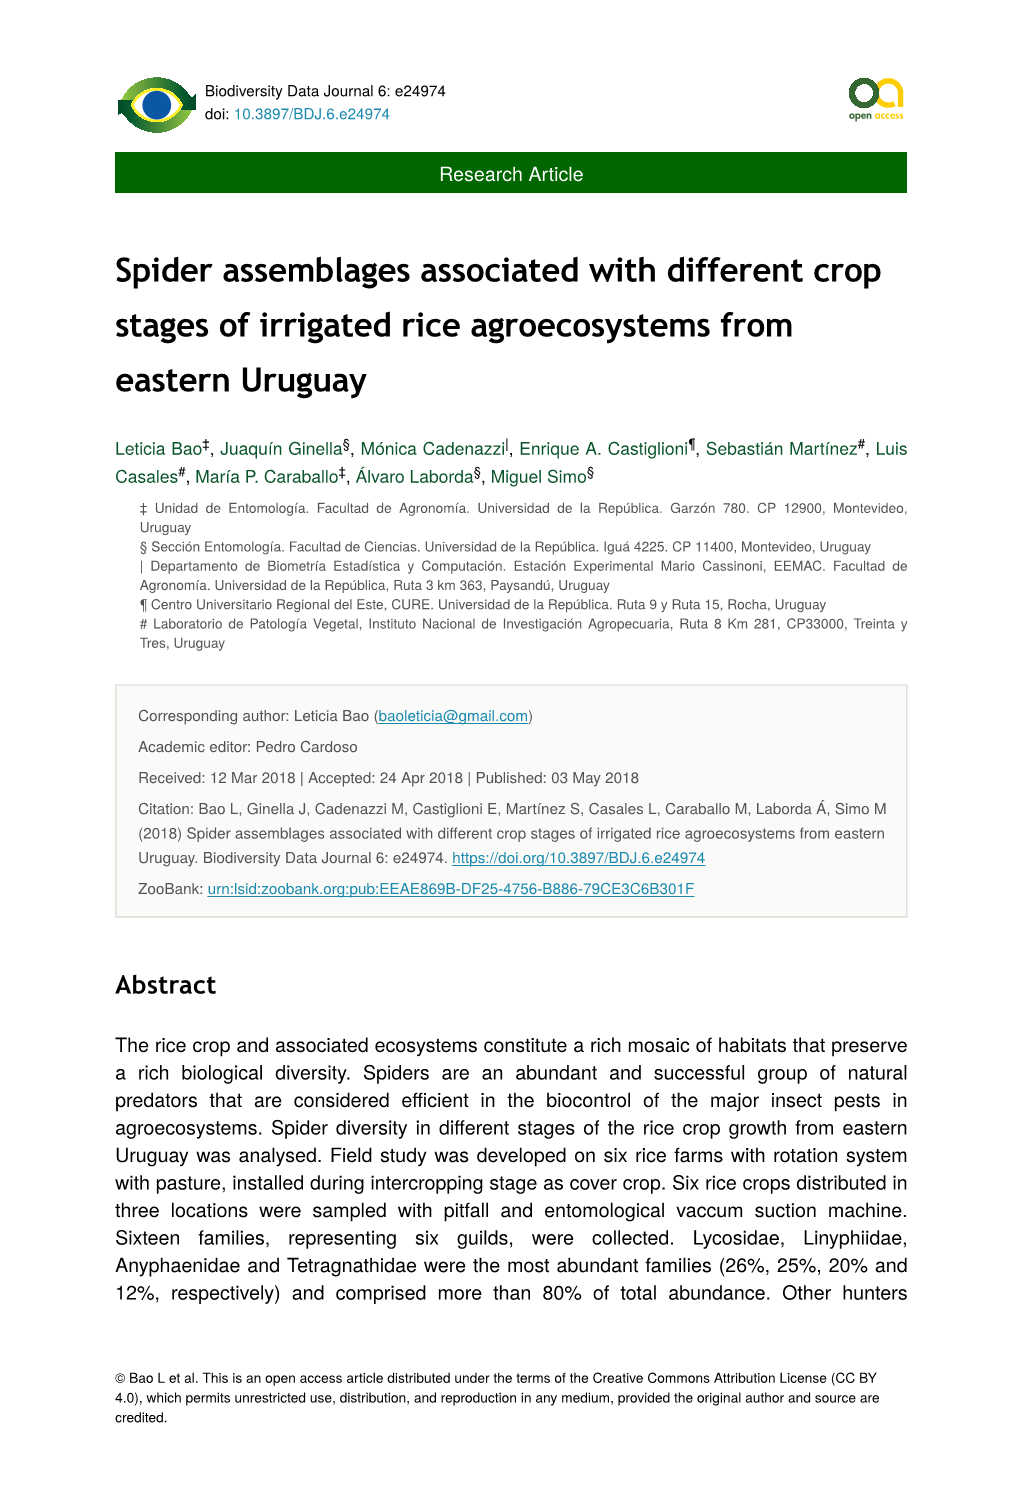 Spider Assemblages Associated with Different Crop Stages of Irrigated Rice Agroecosystems from Eastern Uruguay